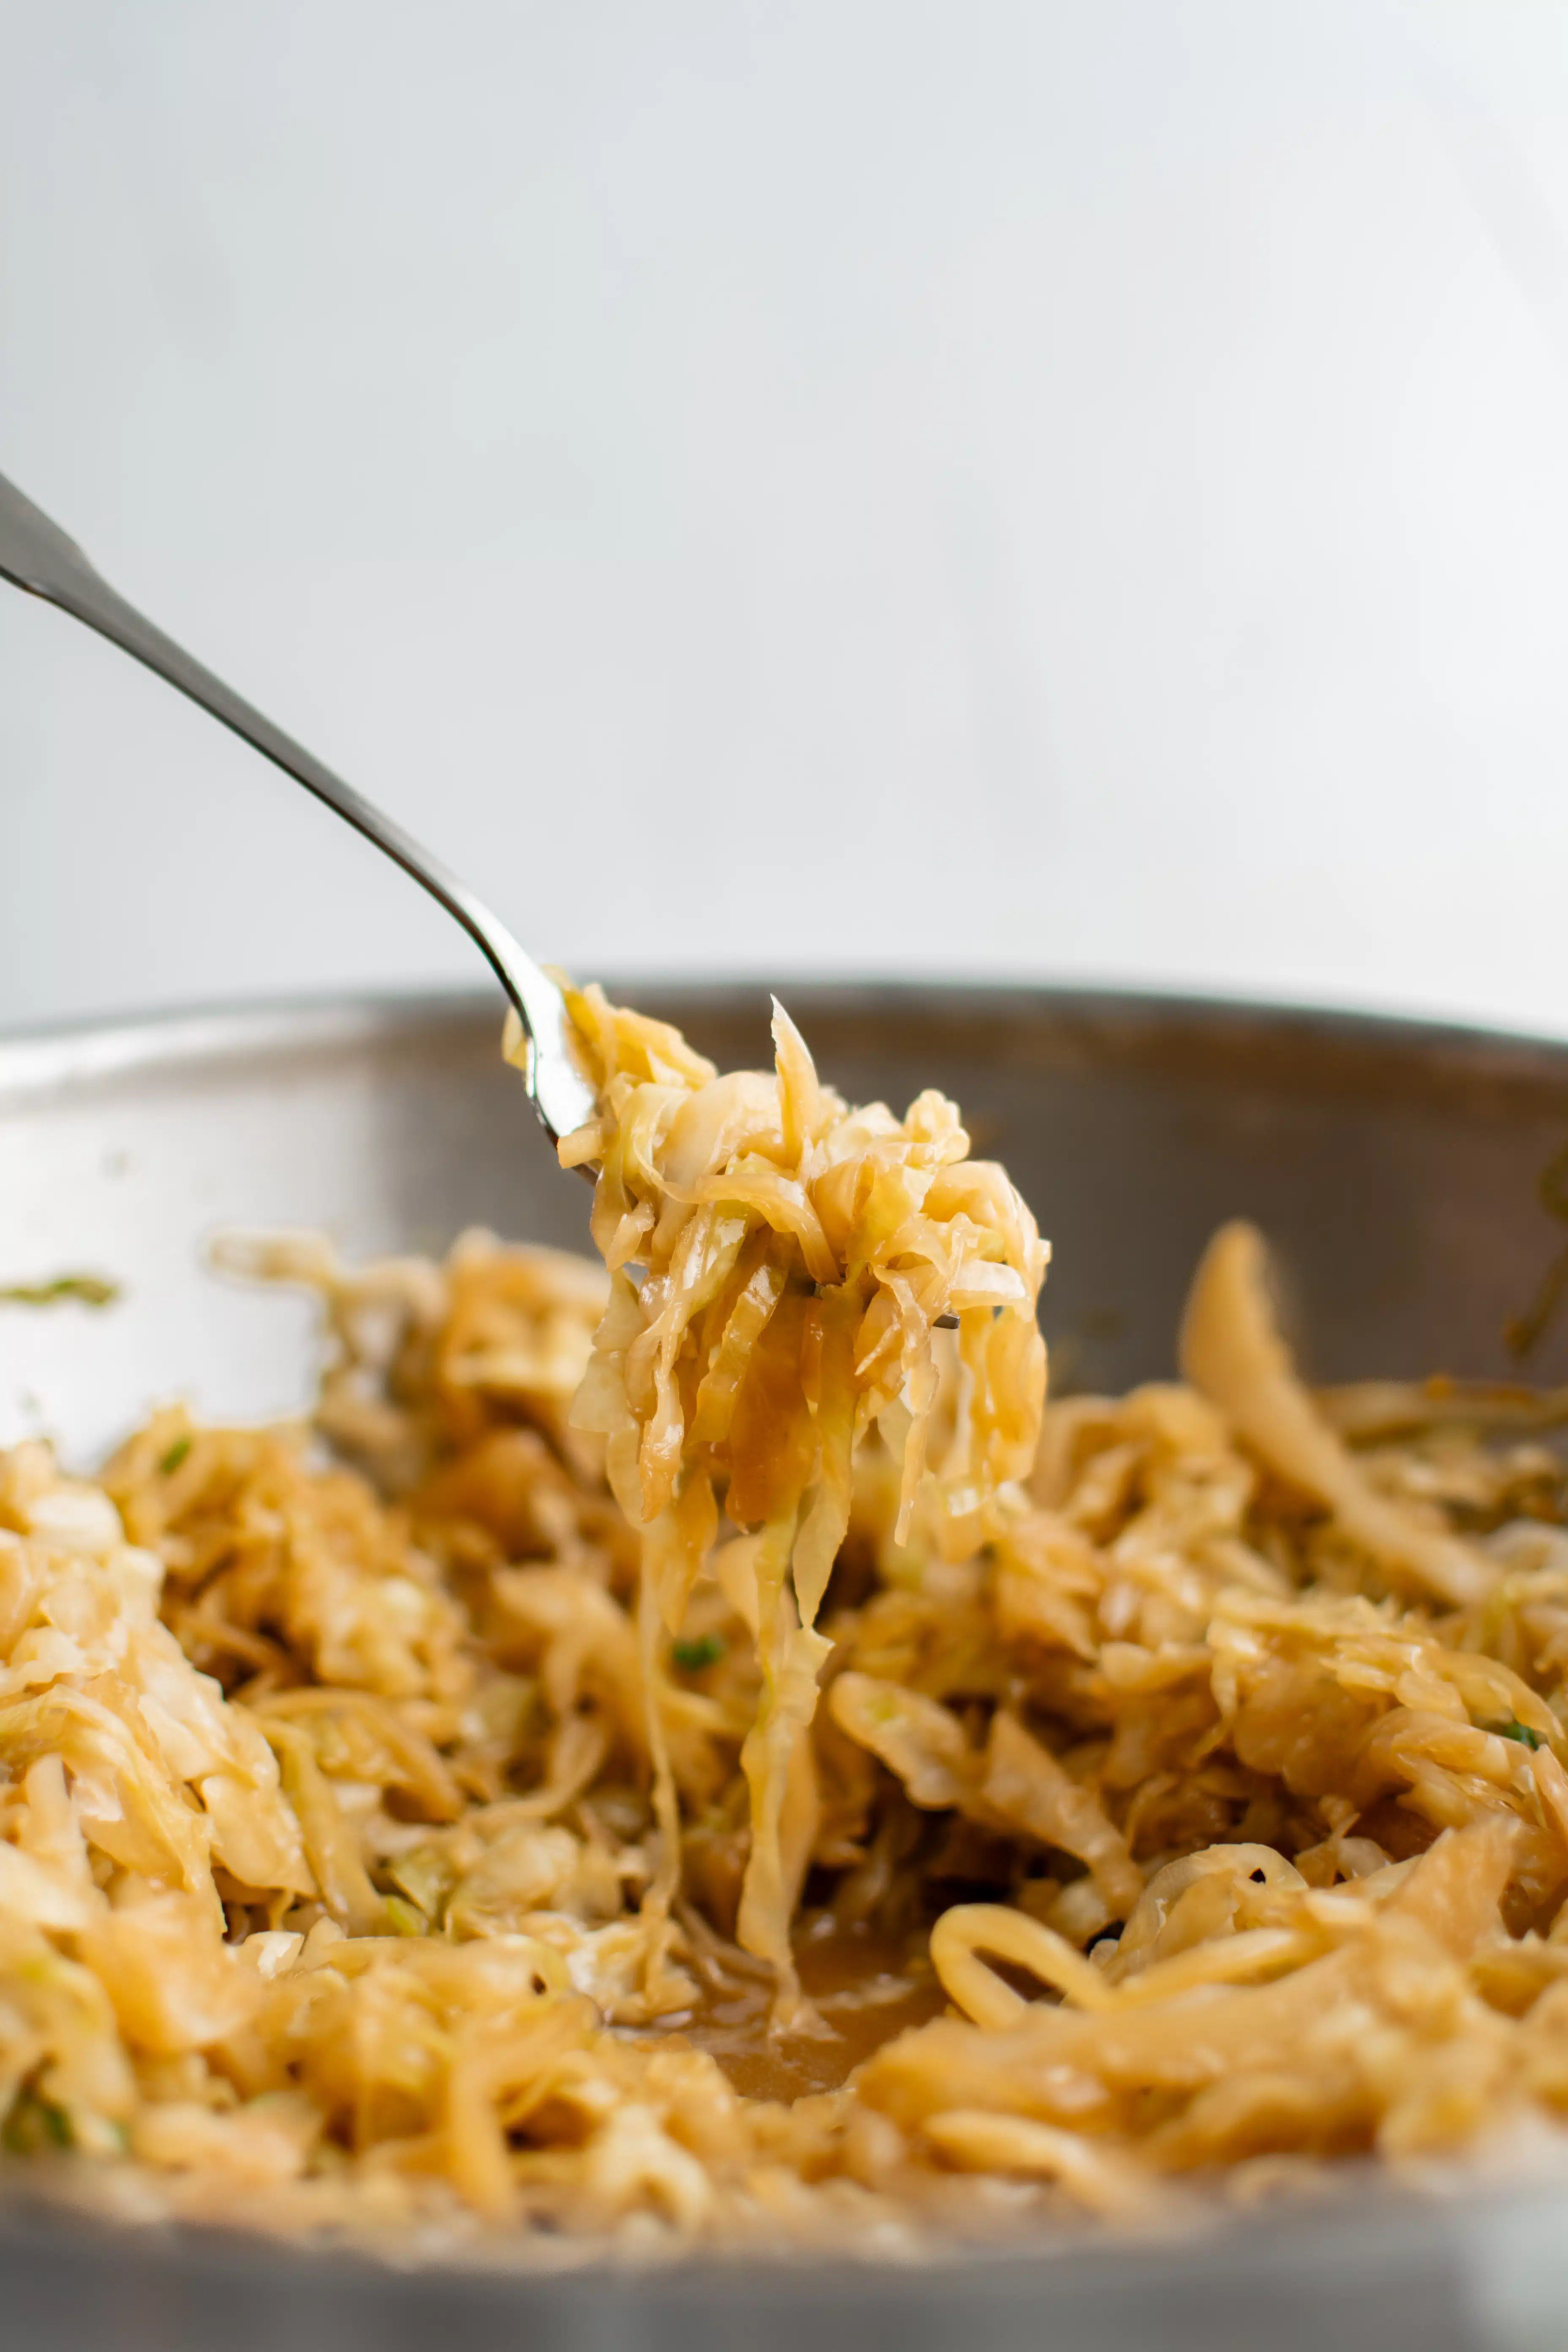 Fork-full of soft stir-fried cabbage hovering above a large wok filled with cooked cabbage stir-fry.